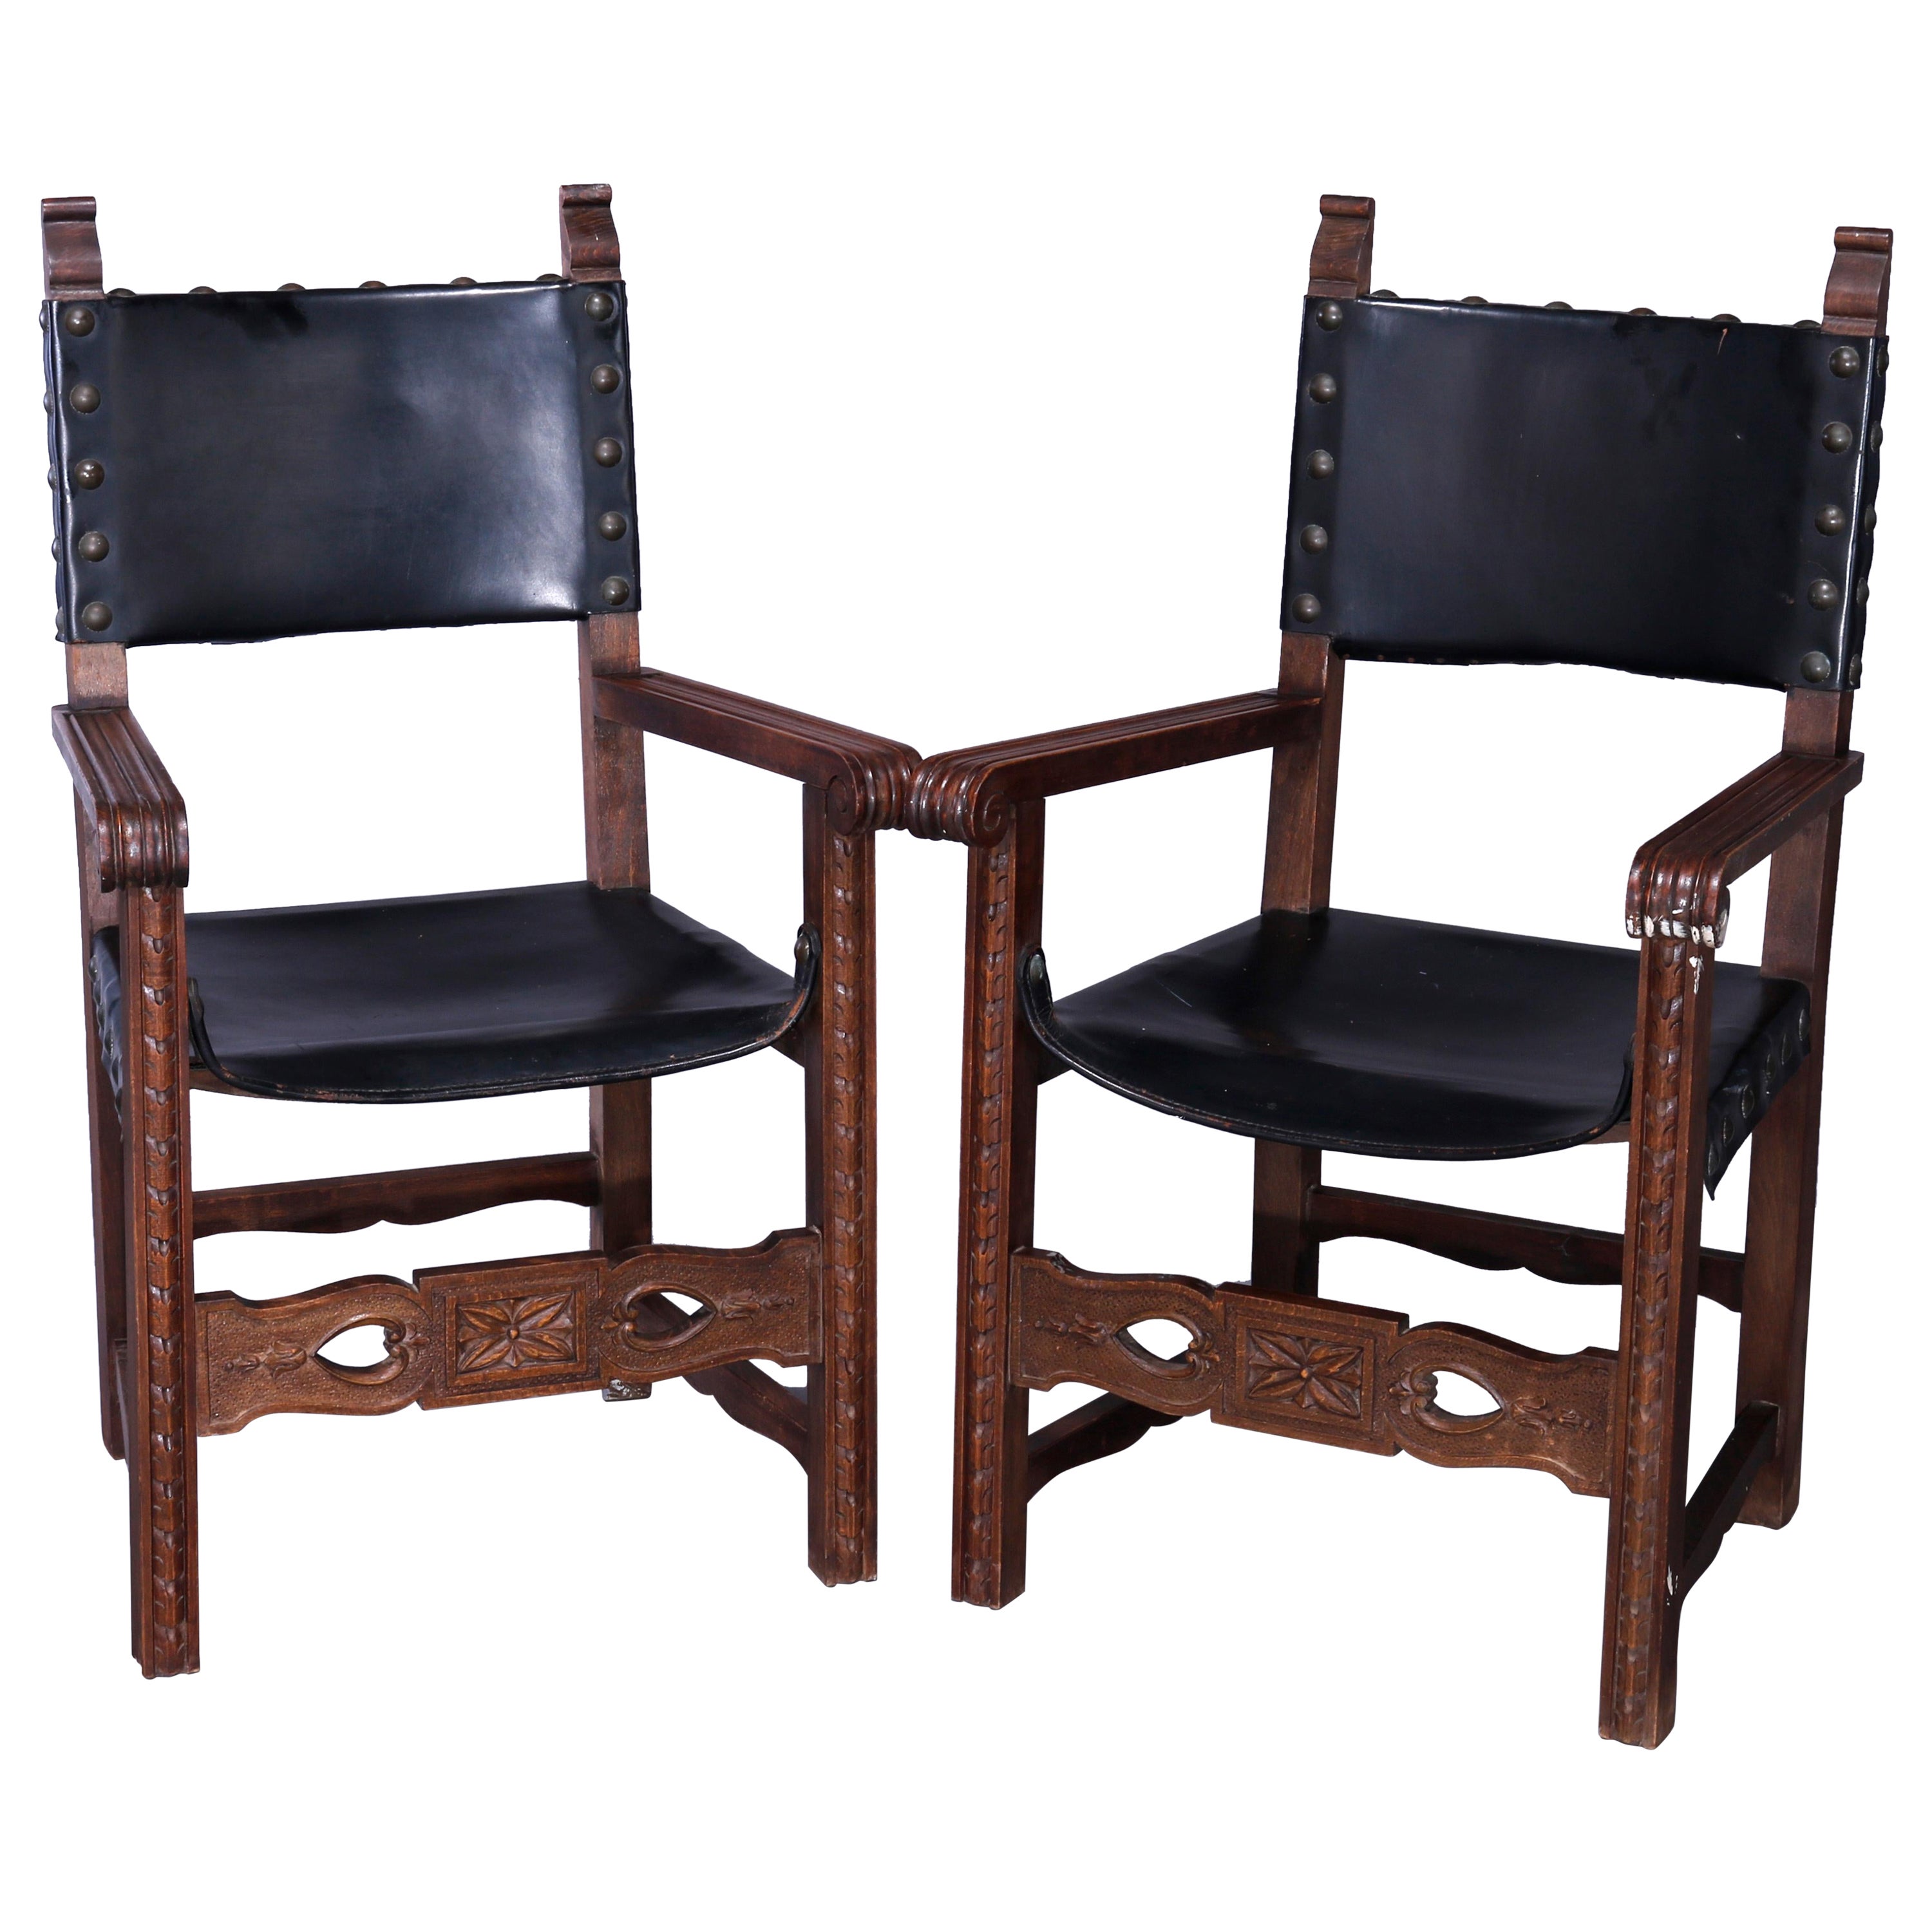 Antique Pair of Continental Jacobean Carved  Walnut & Leather Chairs, Circa 1900